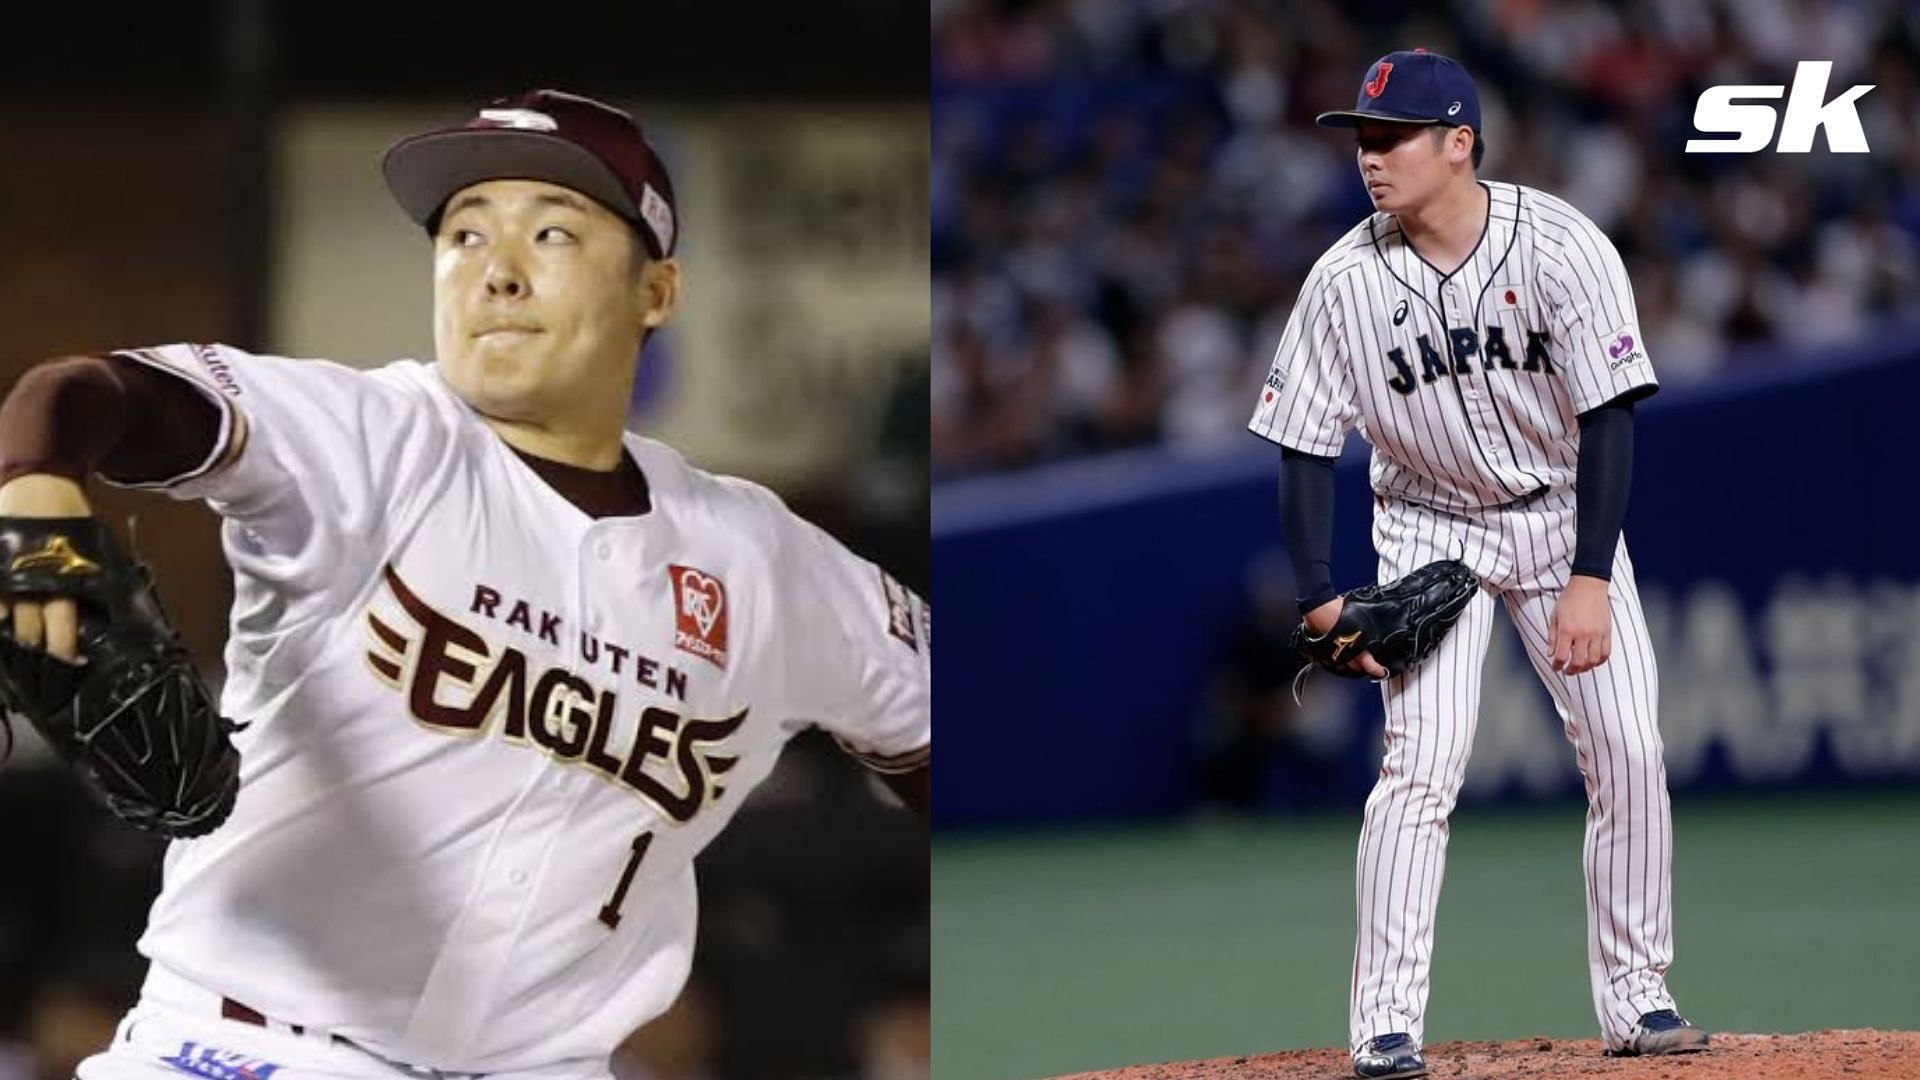 Free agent Yuki Matsui reportedly close to signing with the San Diego Padres